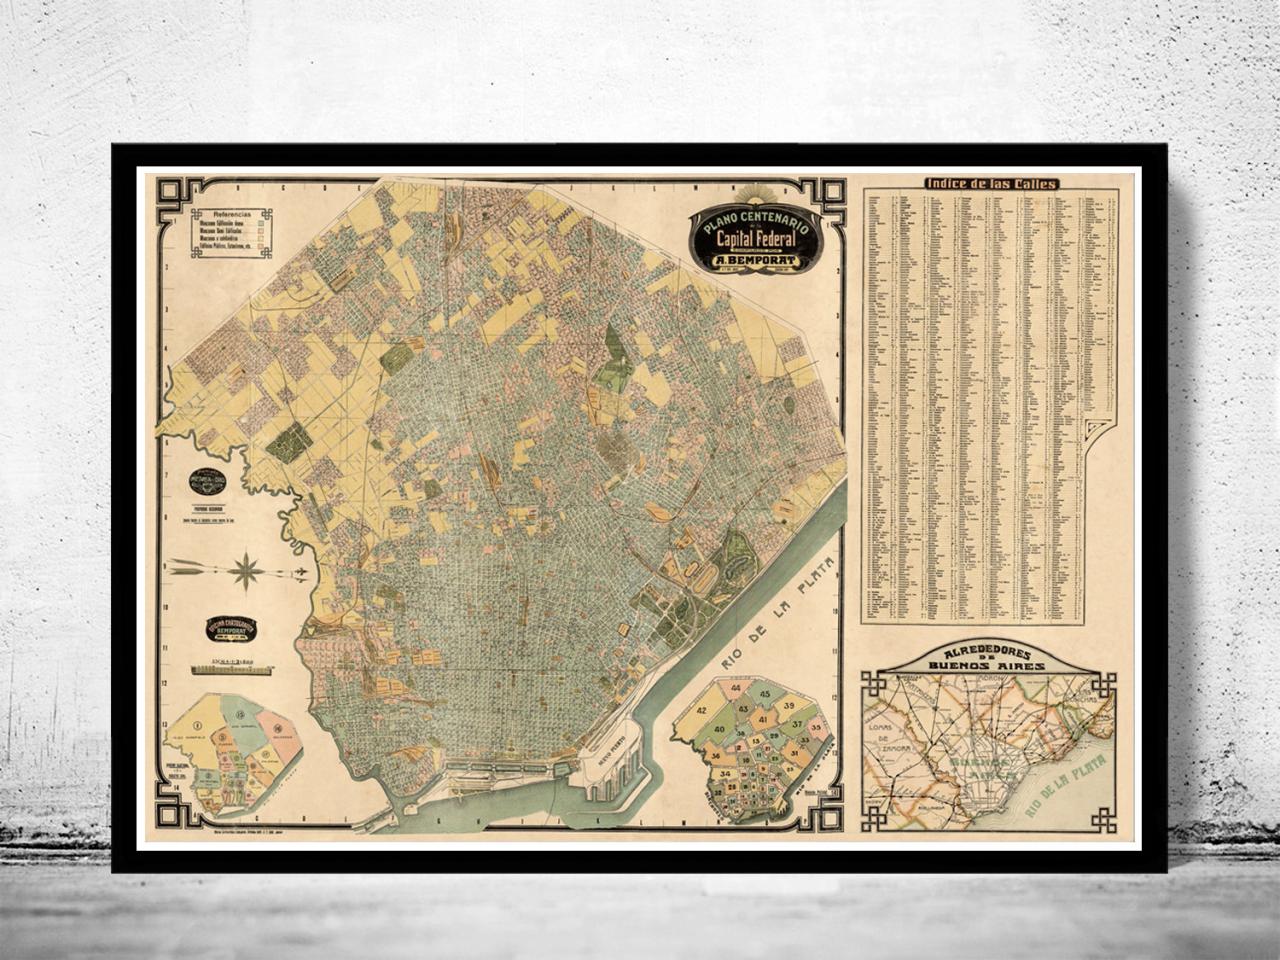 Buenos Aires Great Old Map, Argentina 1920 Vintage Map Of Buenos Aires